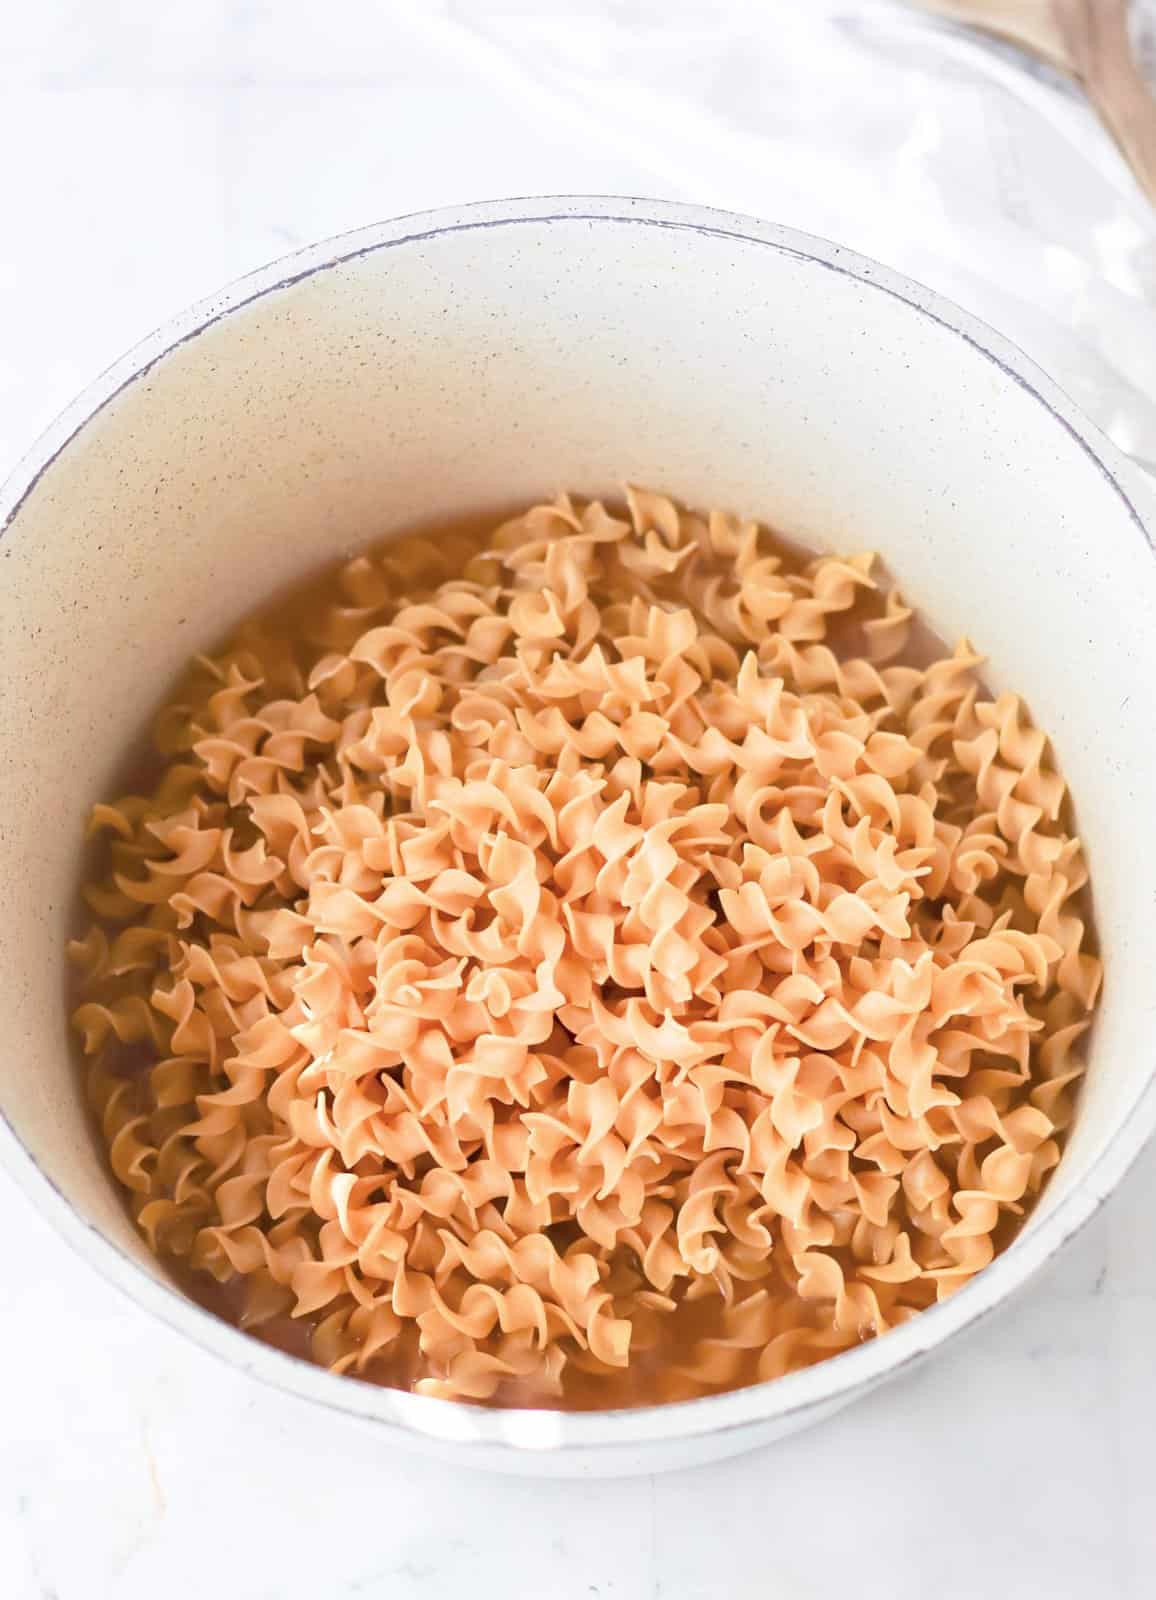 Noodles and chicken stock in pan.